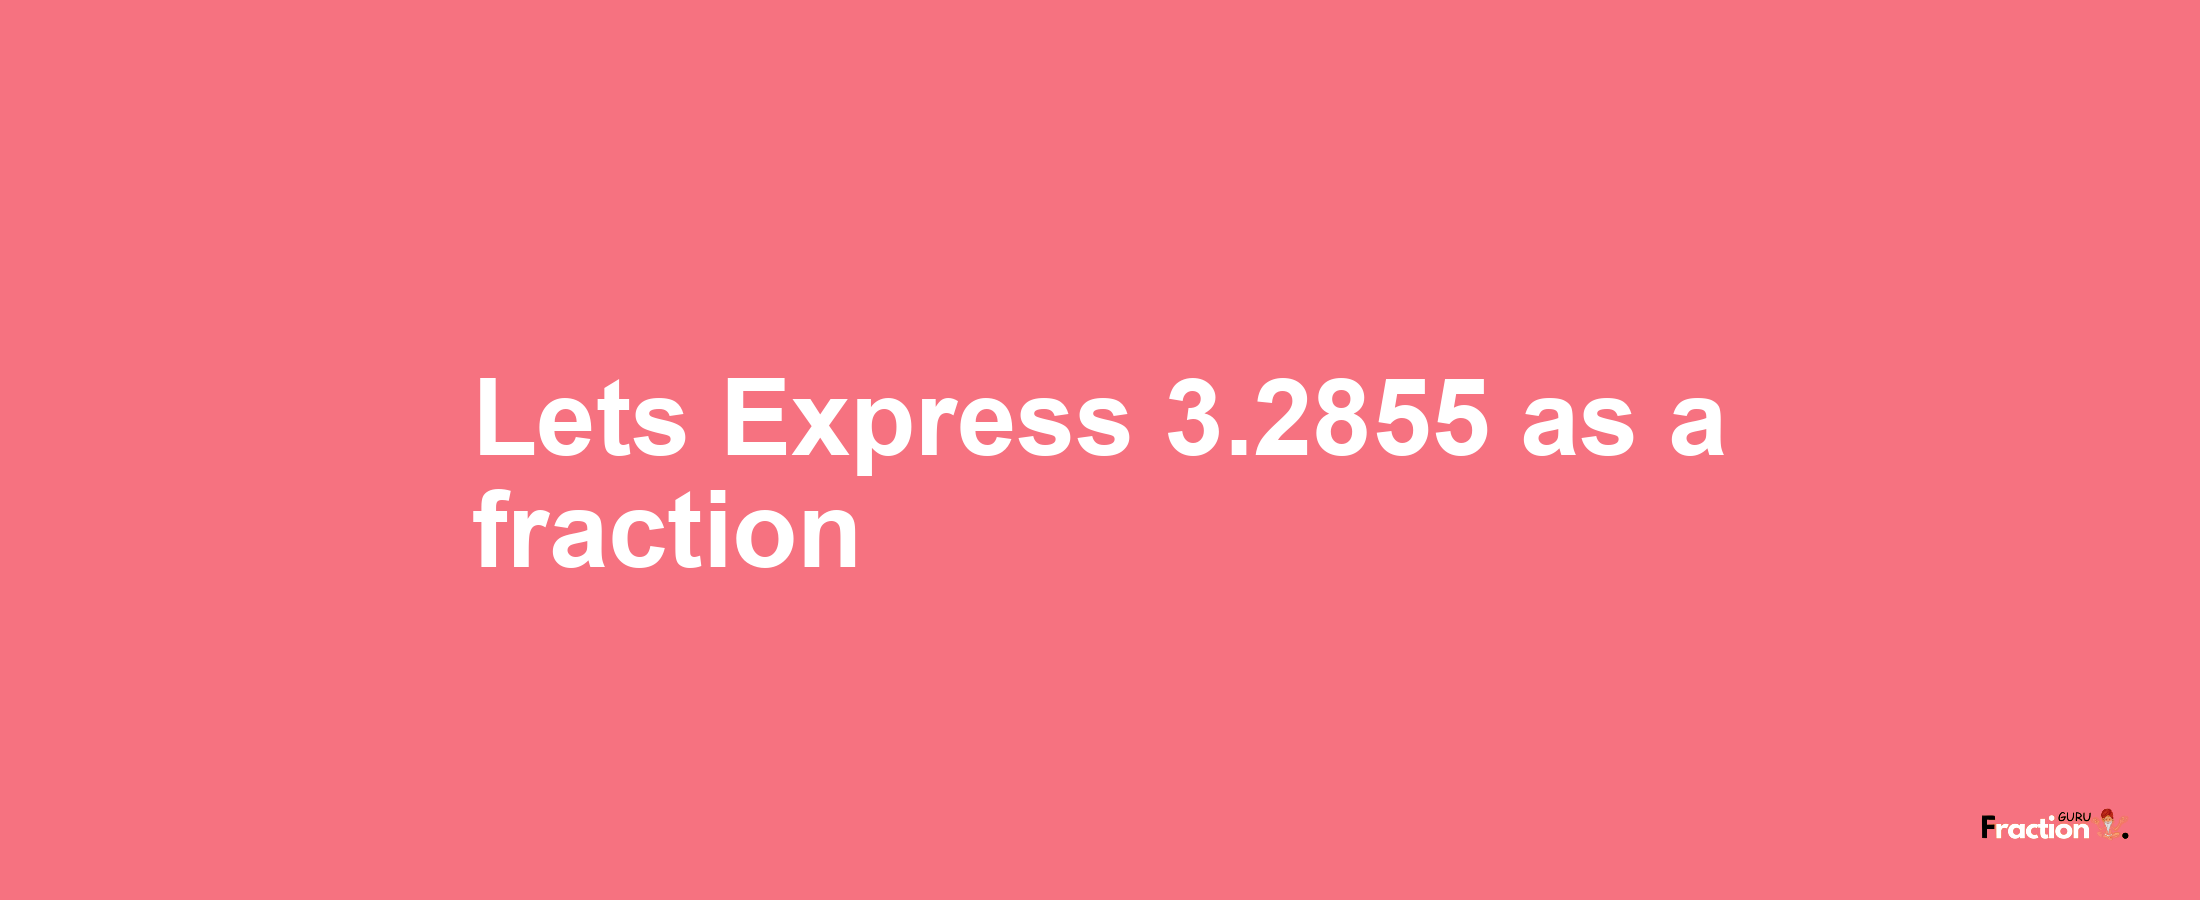 Lets Express 3.2855 as afraction